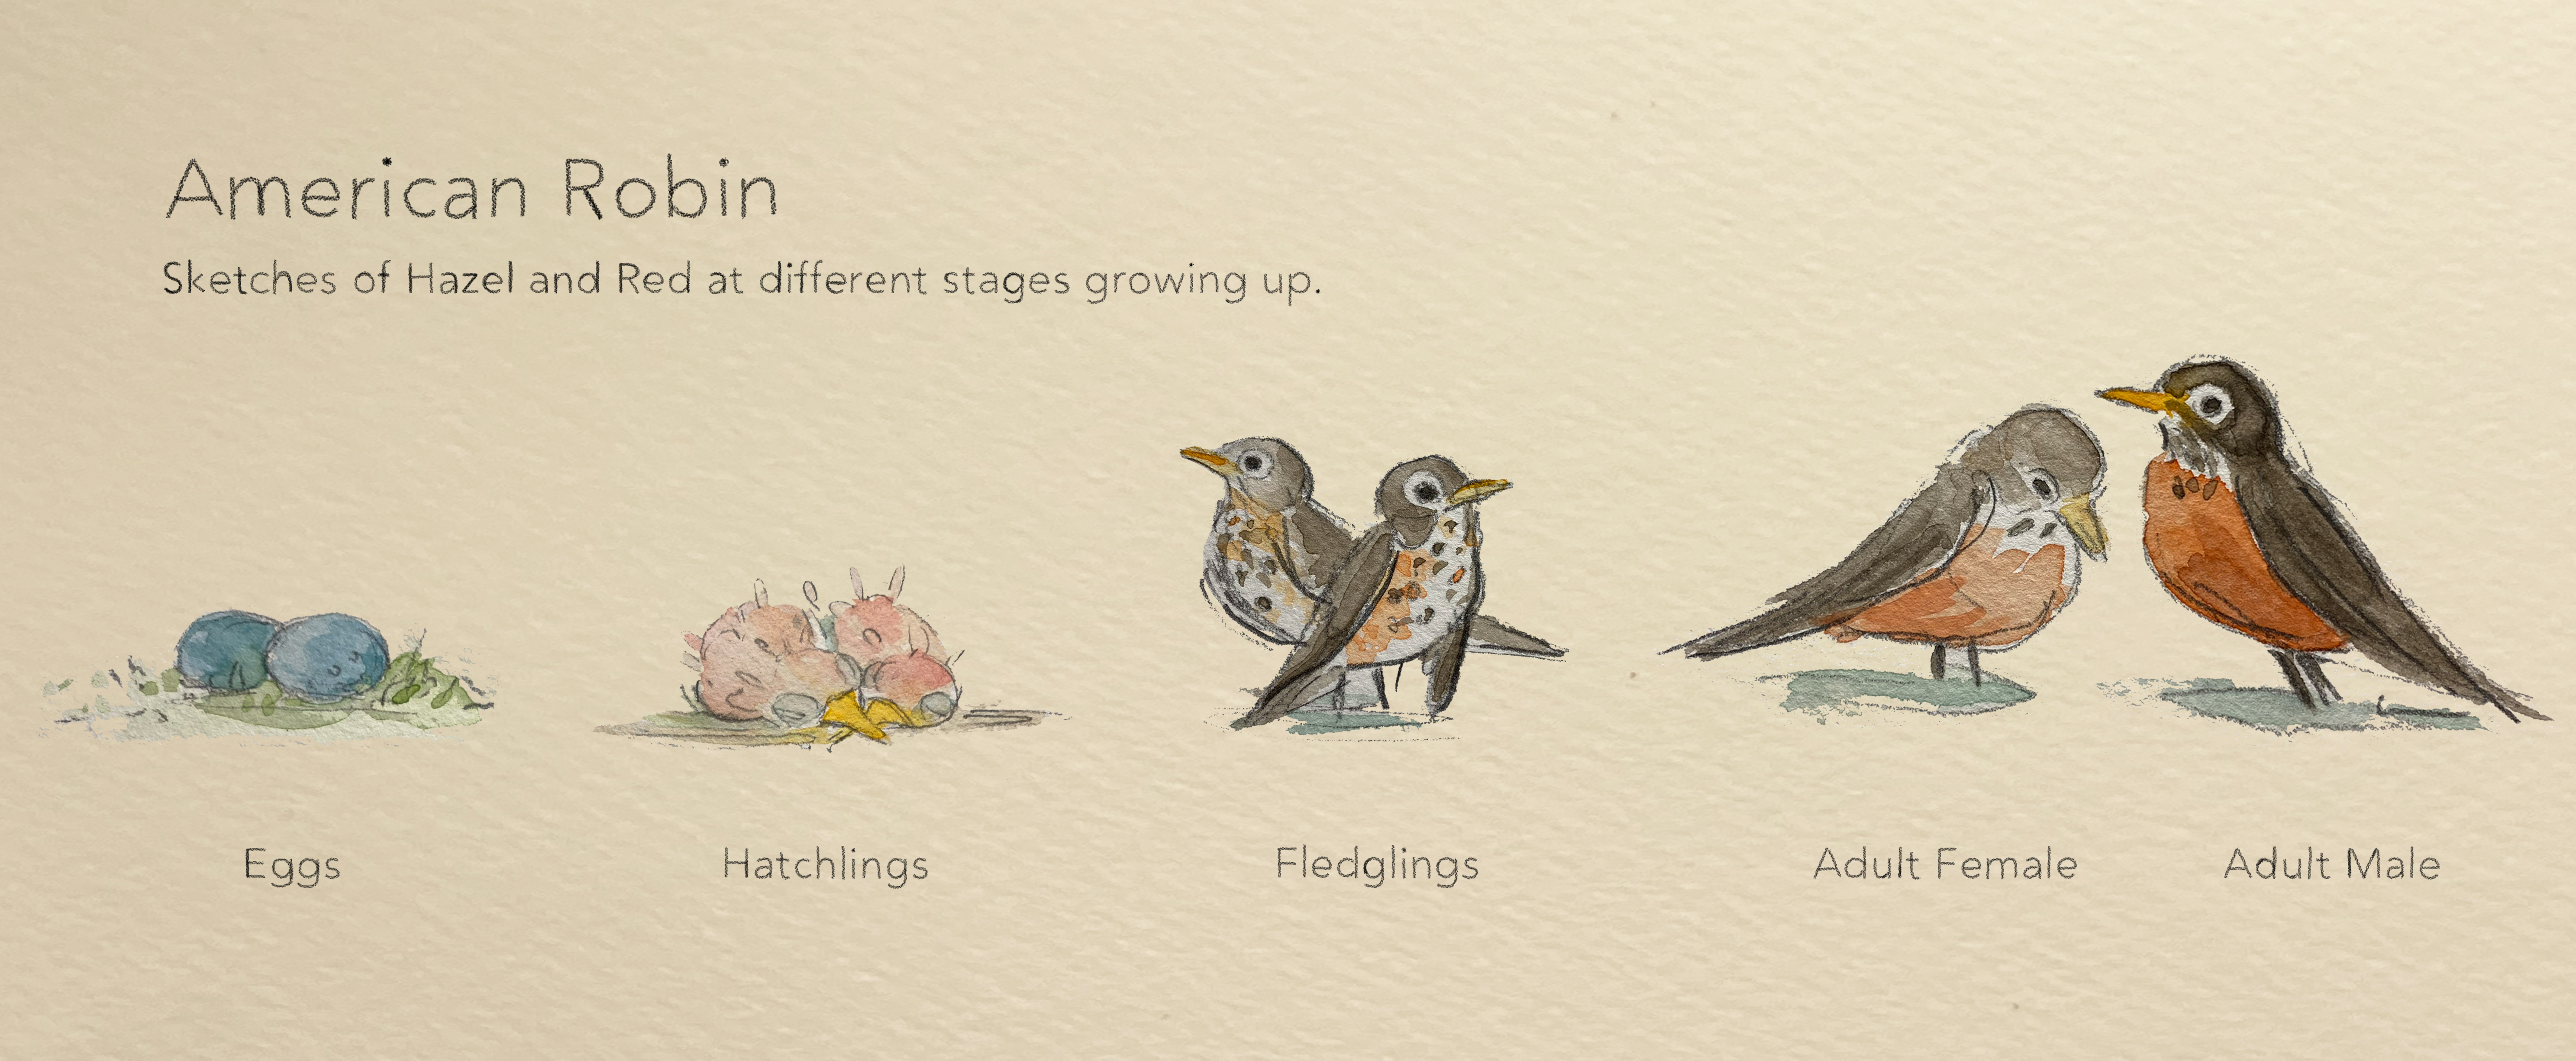 Sketches of American Robin as Eggs, Hatchlings, Fledglings, Adult Female, and Adult Male.